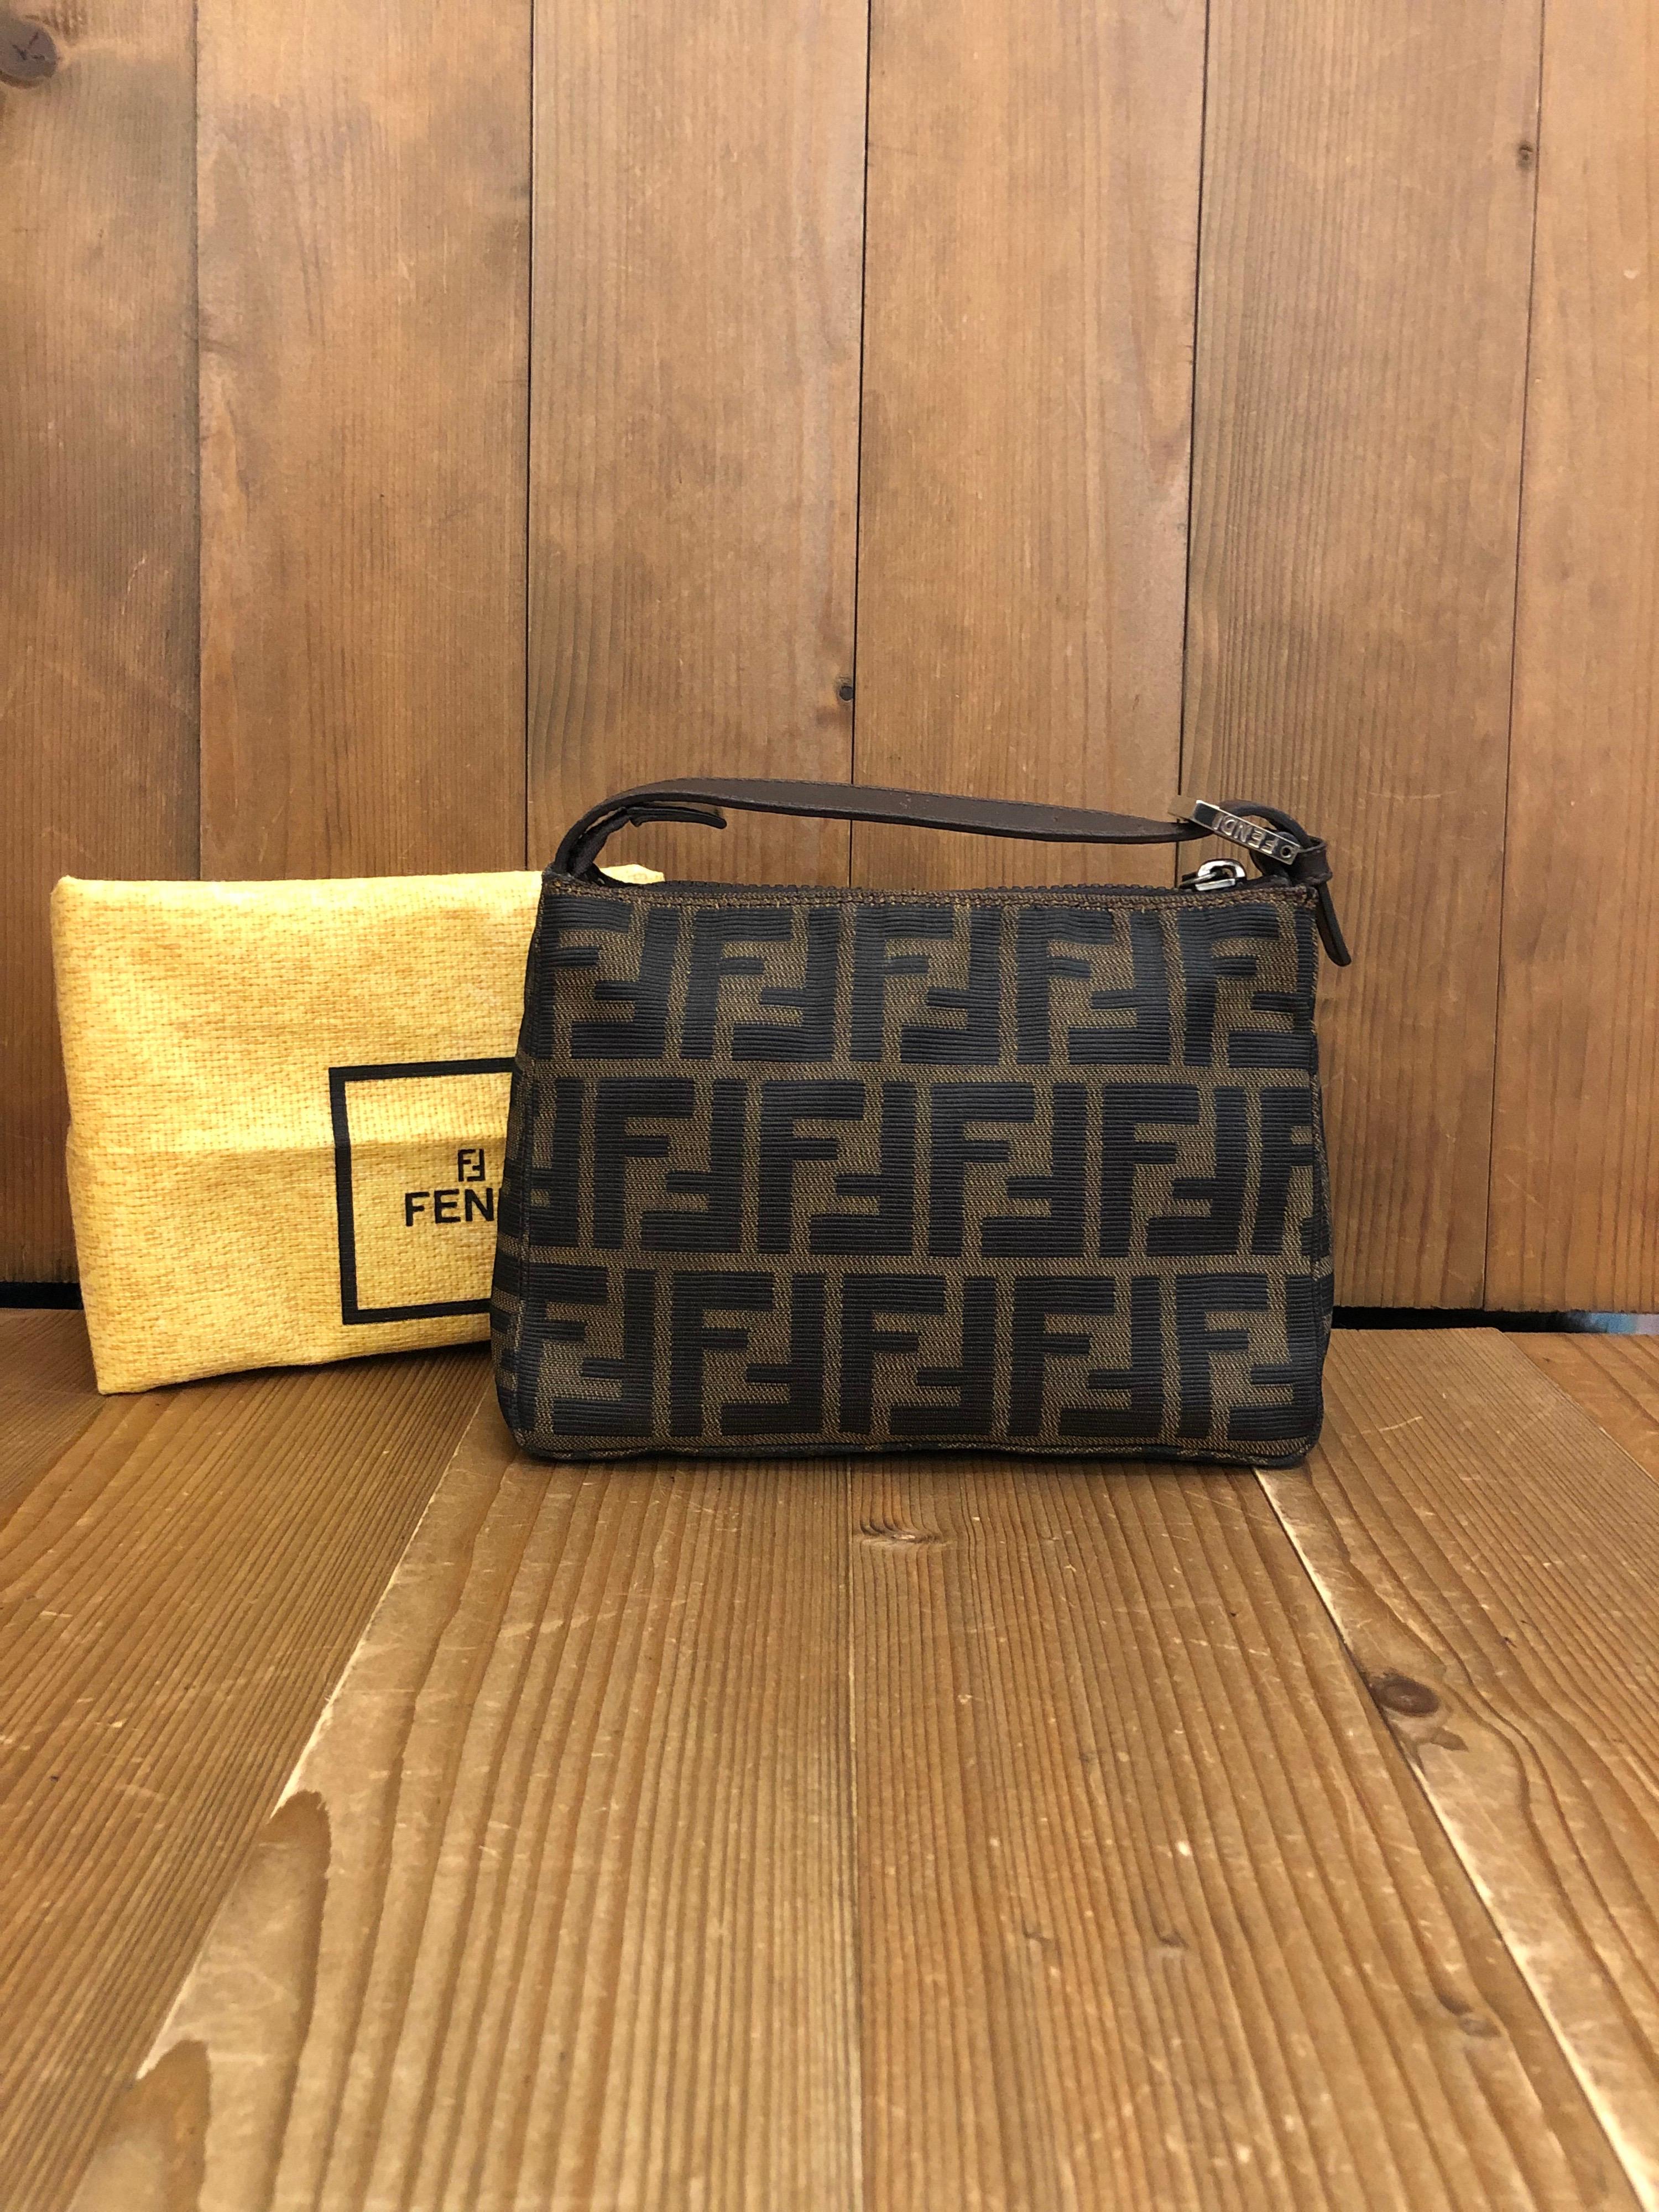 Vintage Fendi mini pouch handbag in Fendi's iconi Zucca jacquard. Zipper top closure. Made in Italy. Measures 7.5 x 5.25 x 3.25 inches (fits plus-sized iPhone). Comes with dust bag.

Condition: Minor signs of wear on exterior. Interior fully